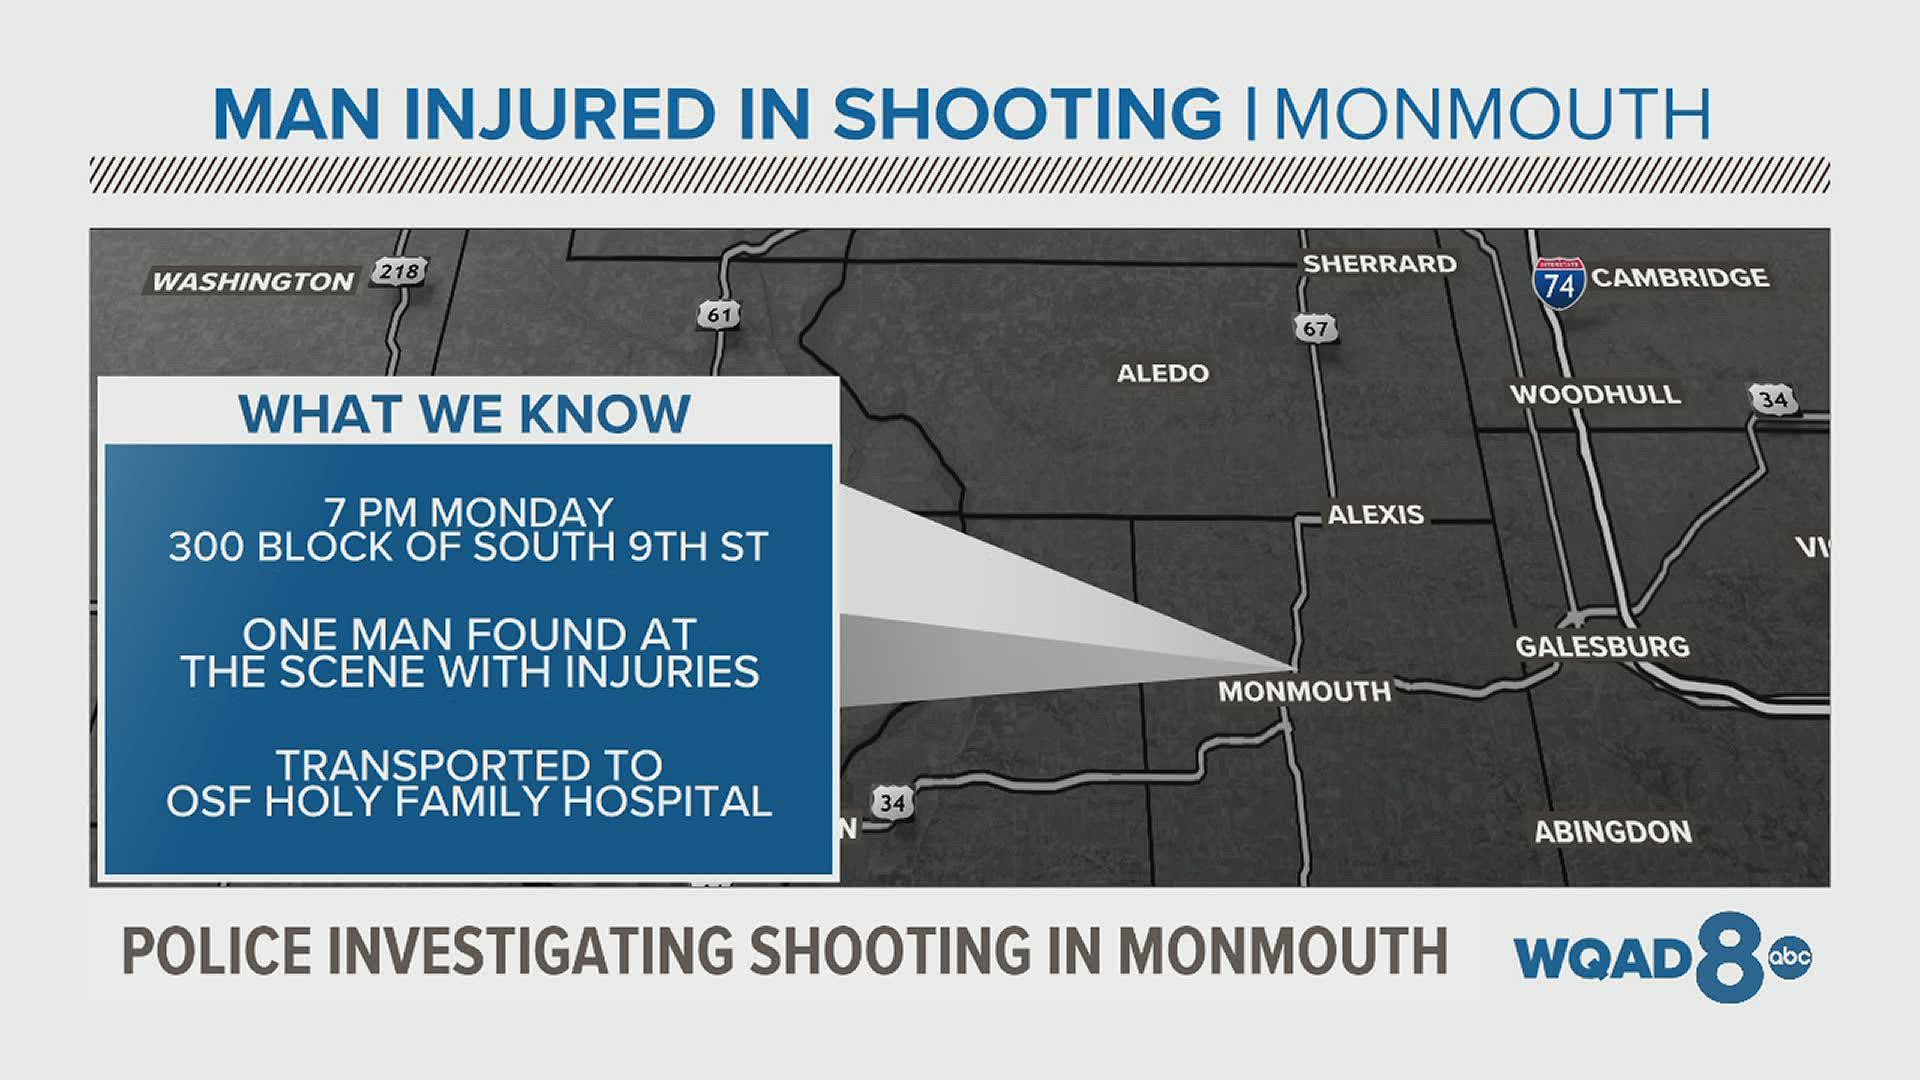 The shooting occurred just after 7 p.m. Monday on the 300 block of South 9th Street, according to Monmouth police.